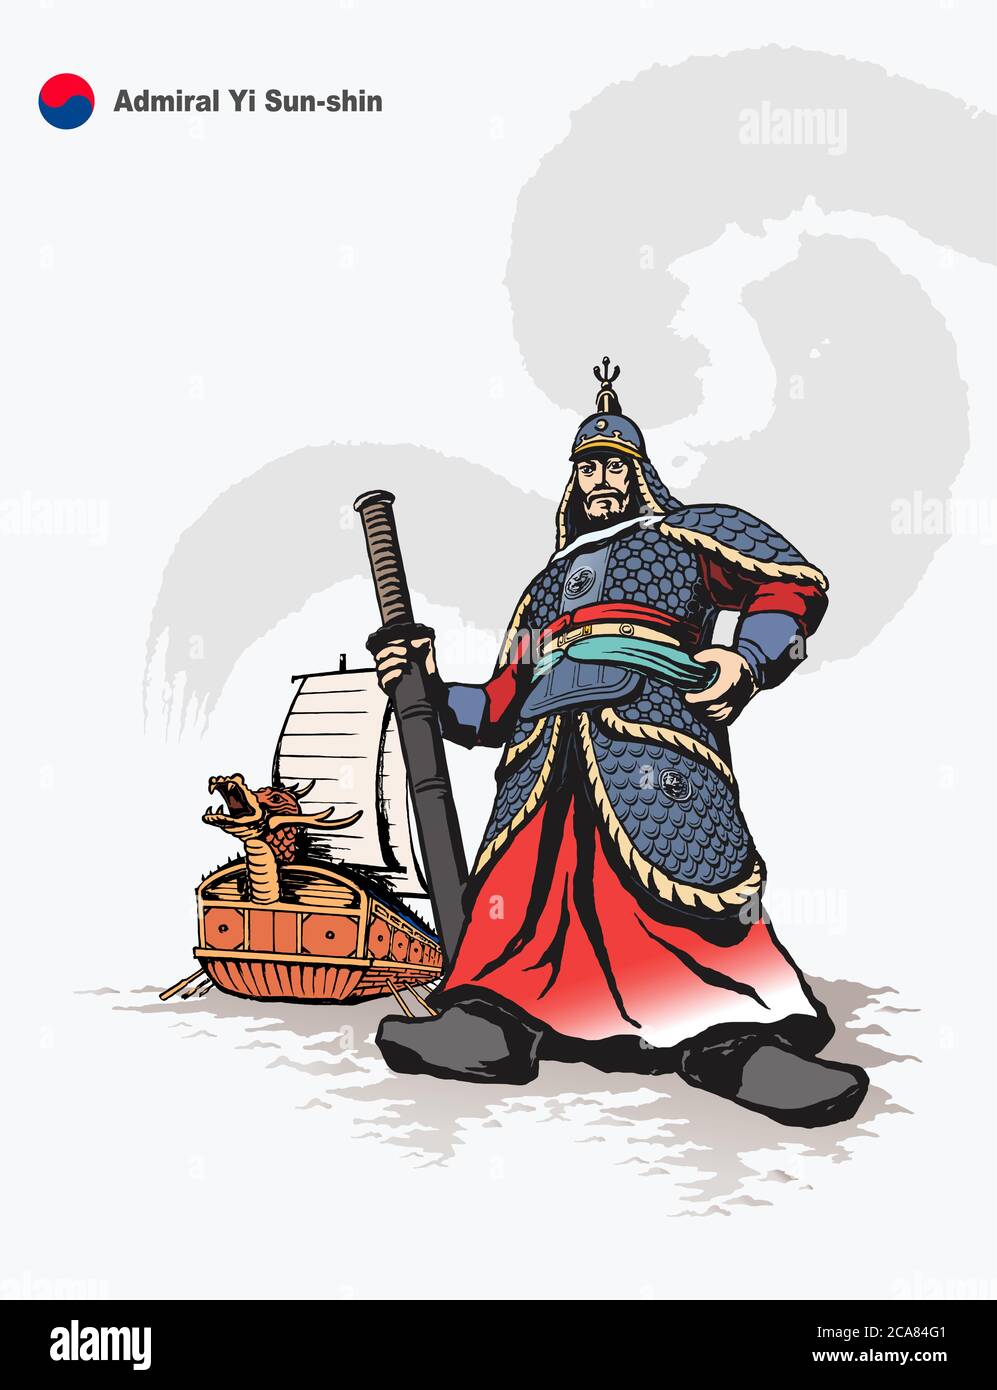 Admiral Yi Sun-shin and Turtle Ship, Korean Historic Heroes painted with brushes. Stock Vector